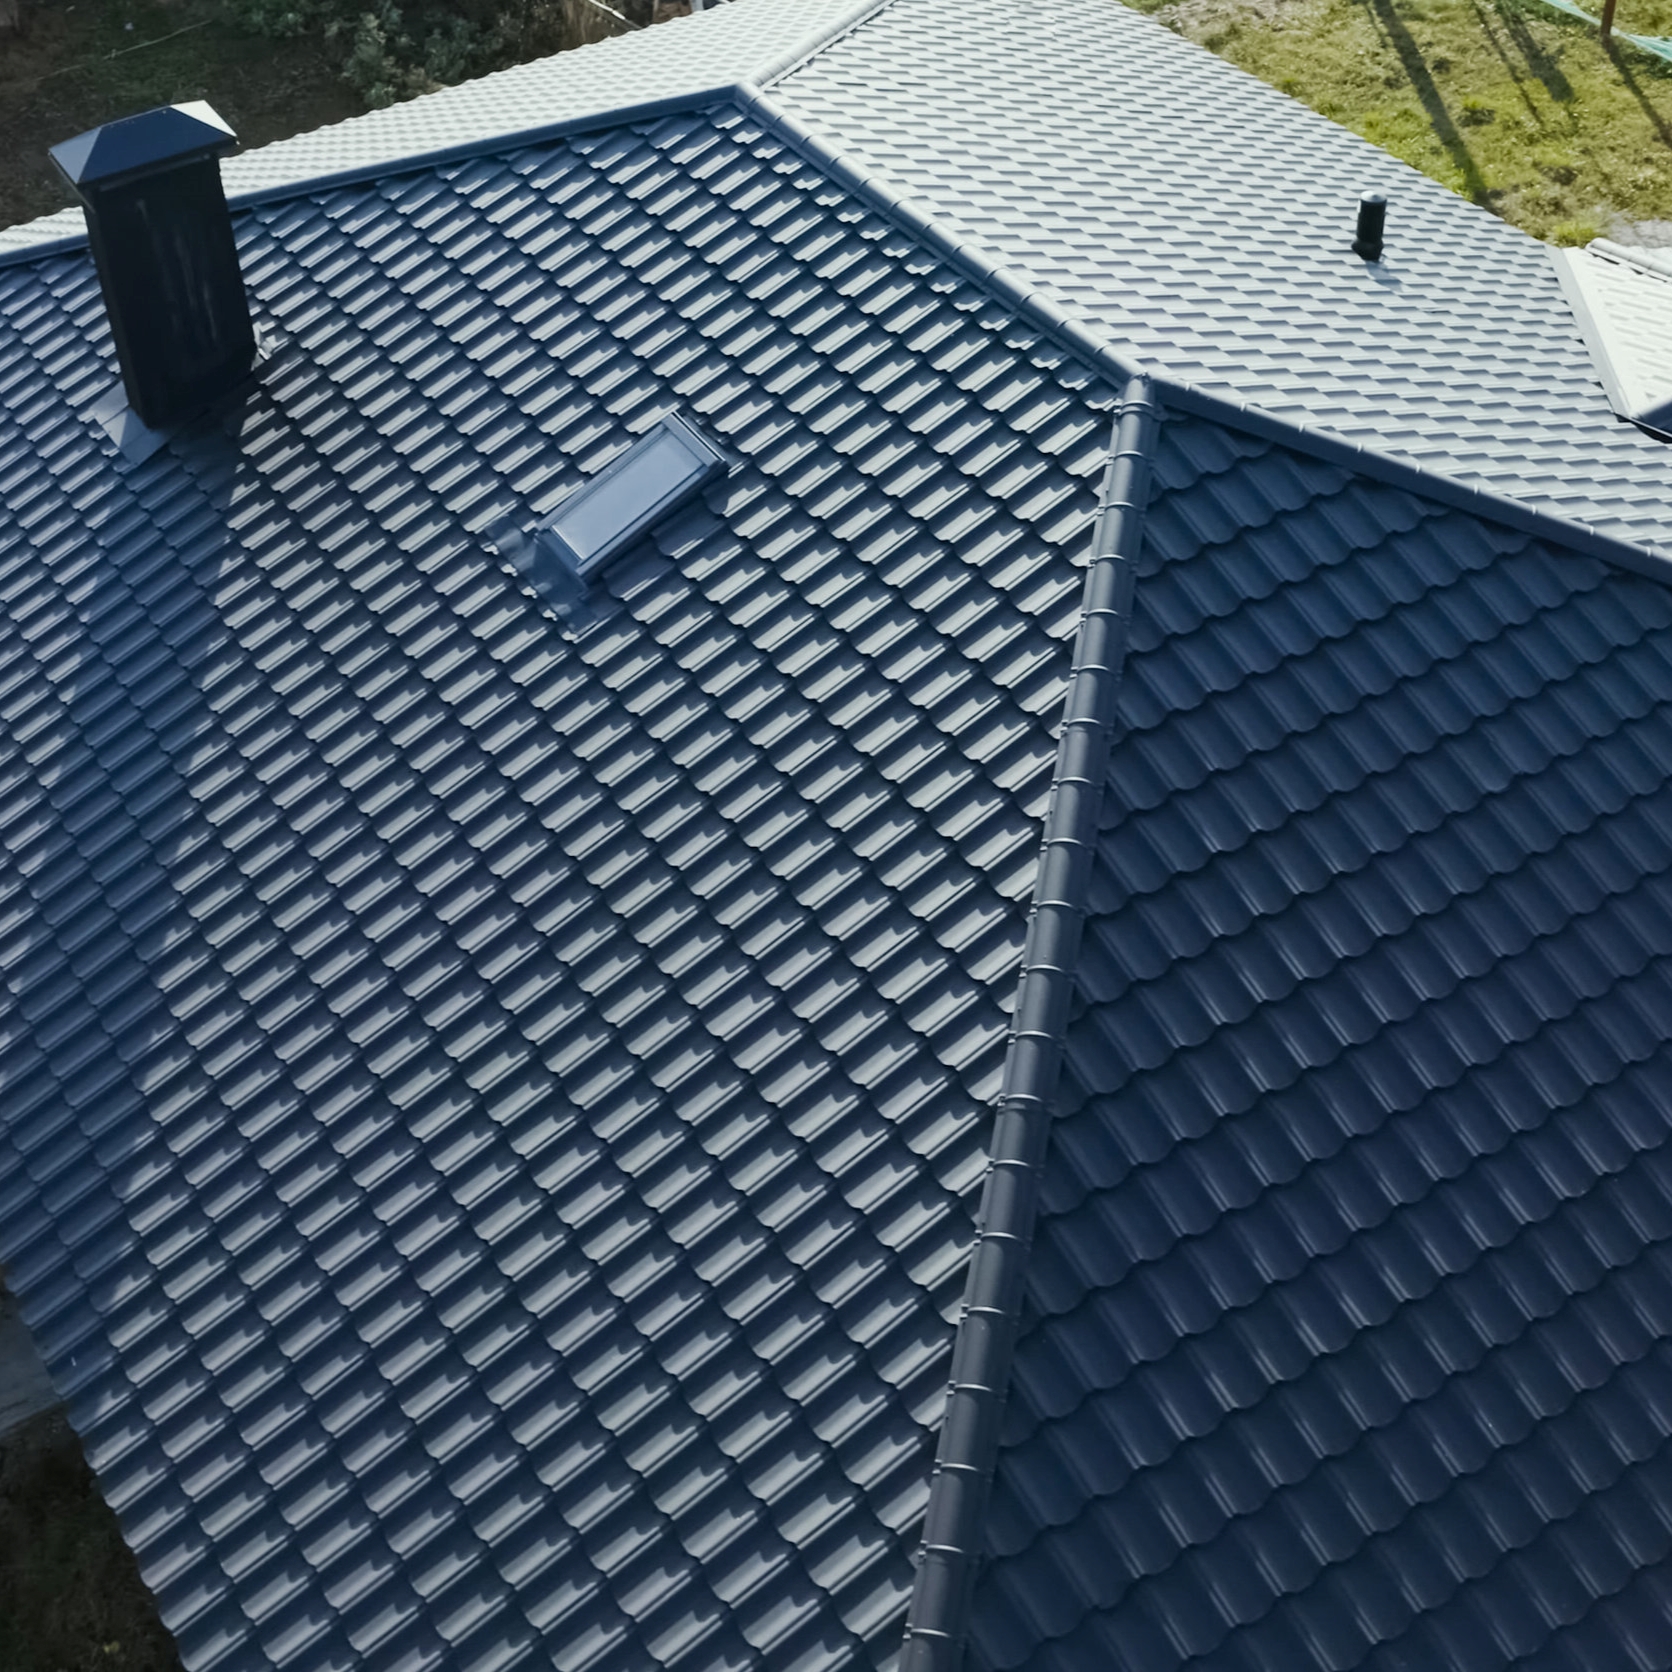 Stone Coated Steel Roofing